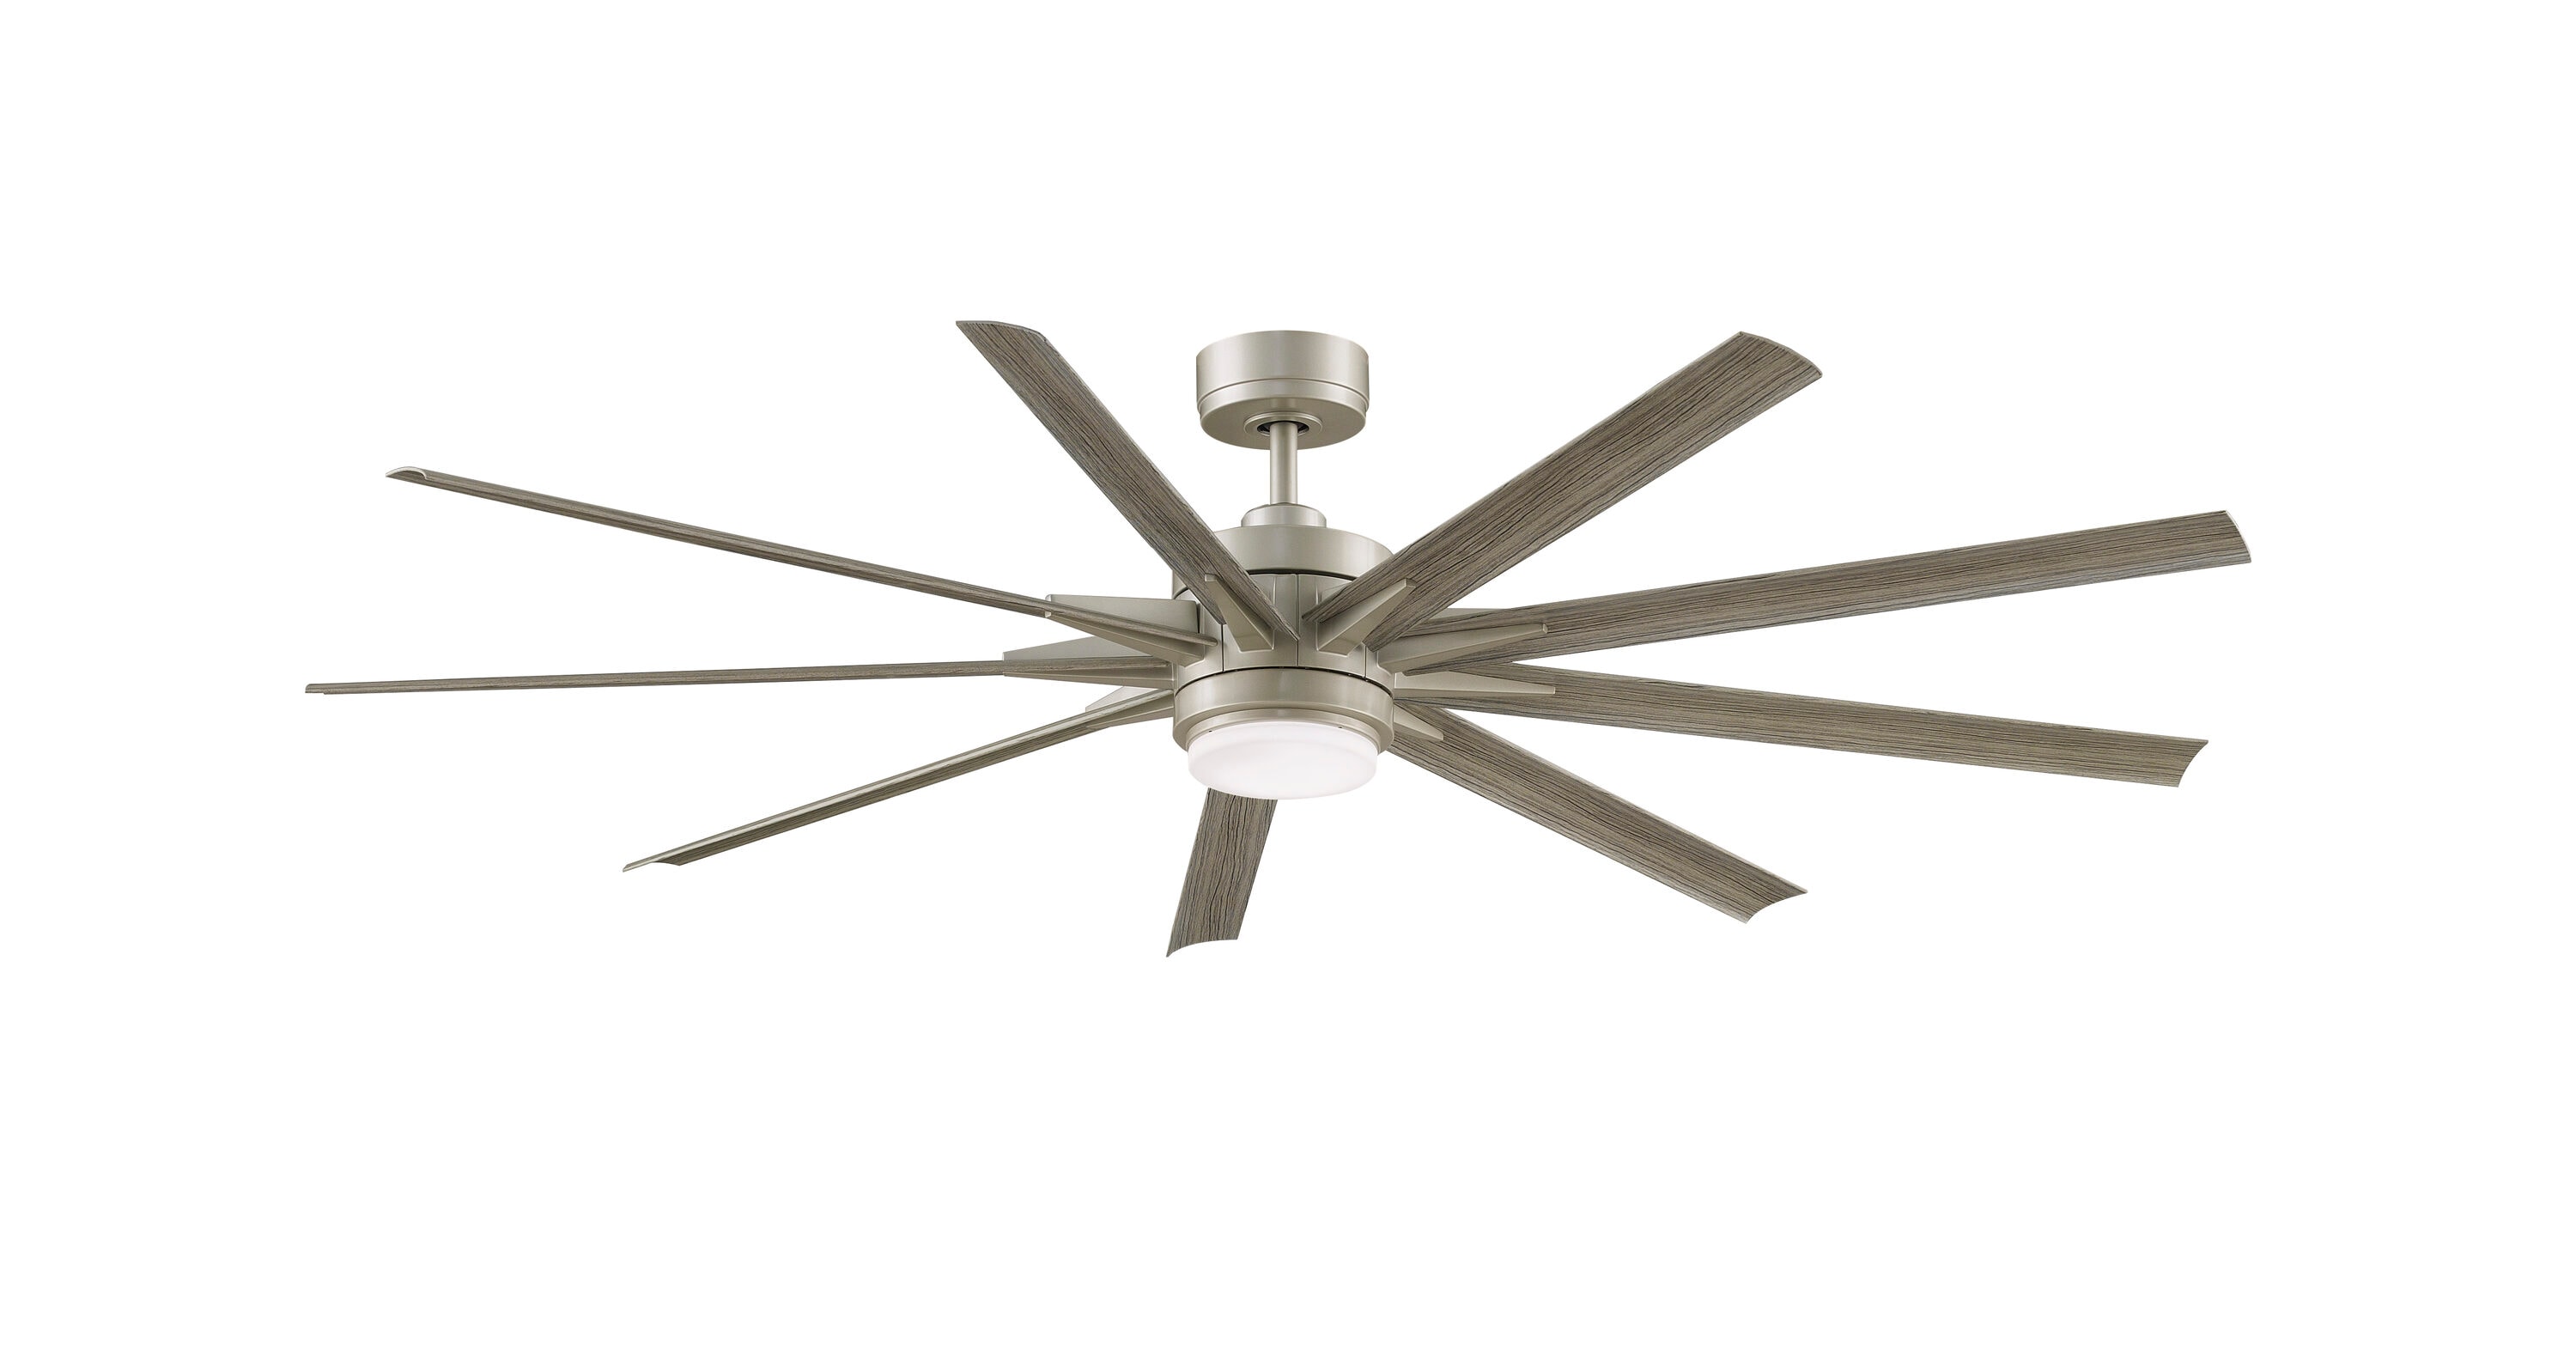 Odyn Custom 72-in Brushed Nickel Color-changing LED Indoor/Outdoor Smart Ceiling Fan with Light Remote (9-Blade) Walnut | - Fanimation FPD8152BNW-72WEW